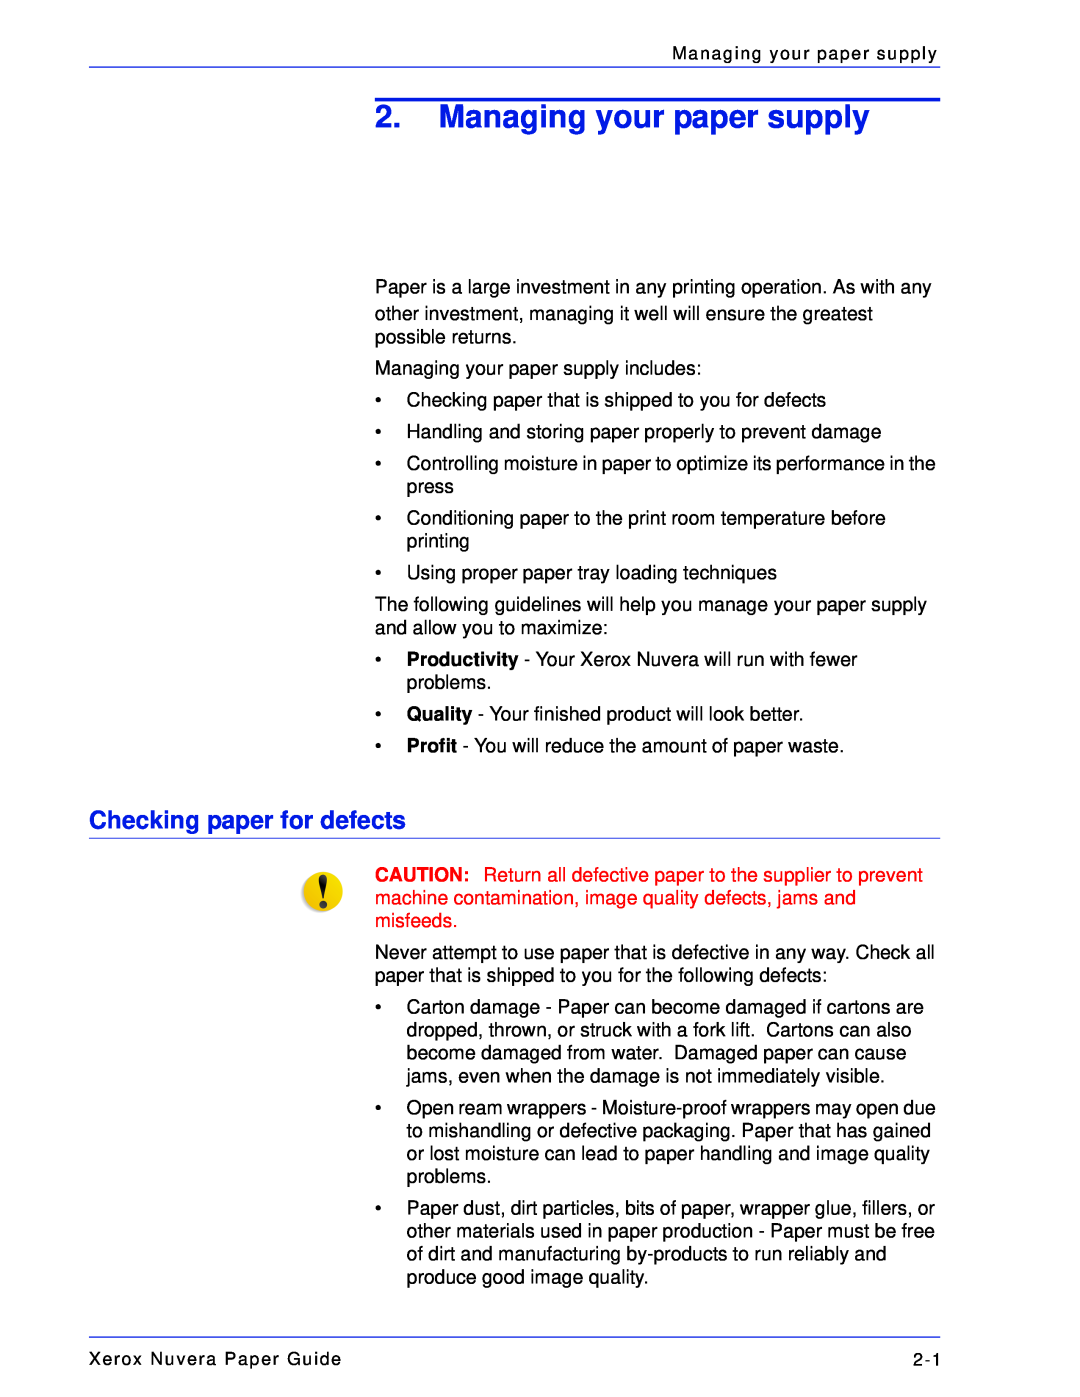 Xerox 701P28020 manual Managing your paper supply, Checking paper for defects 